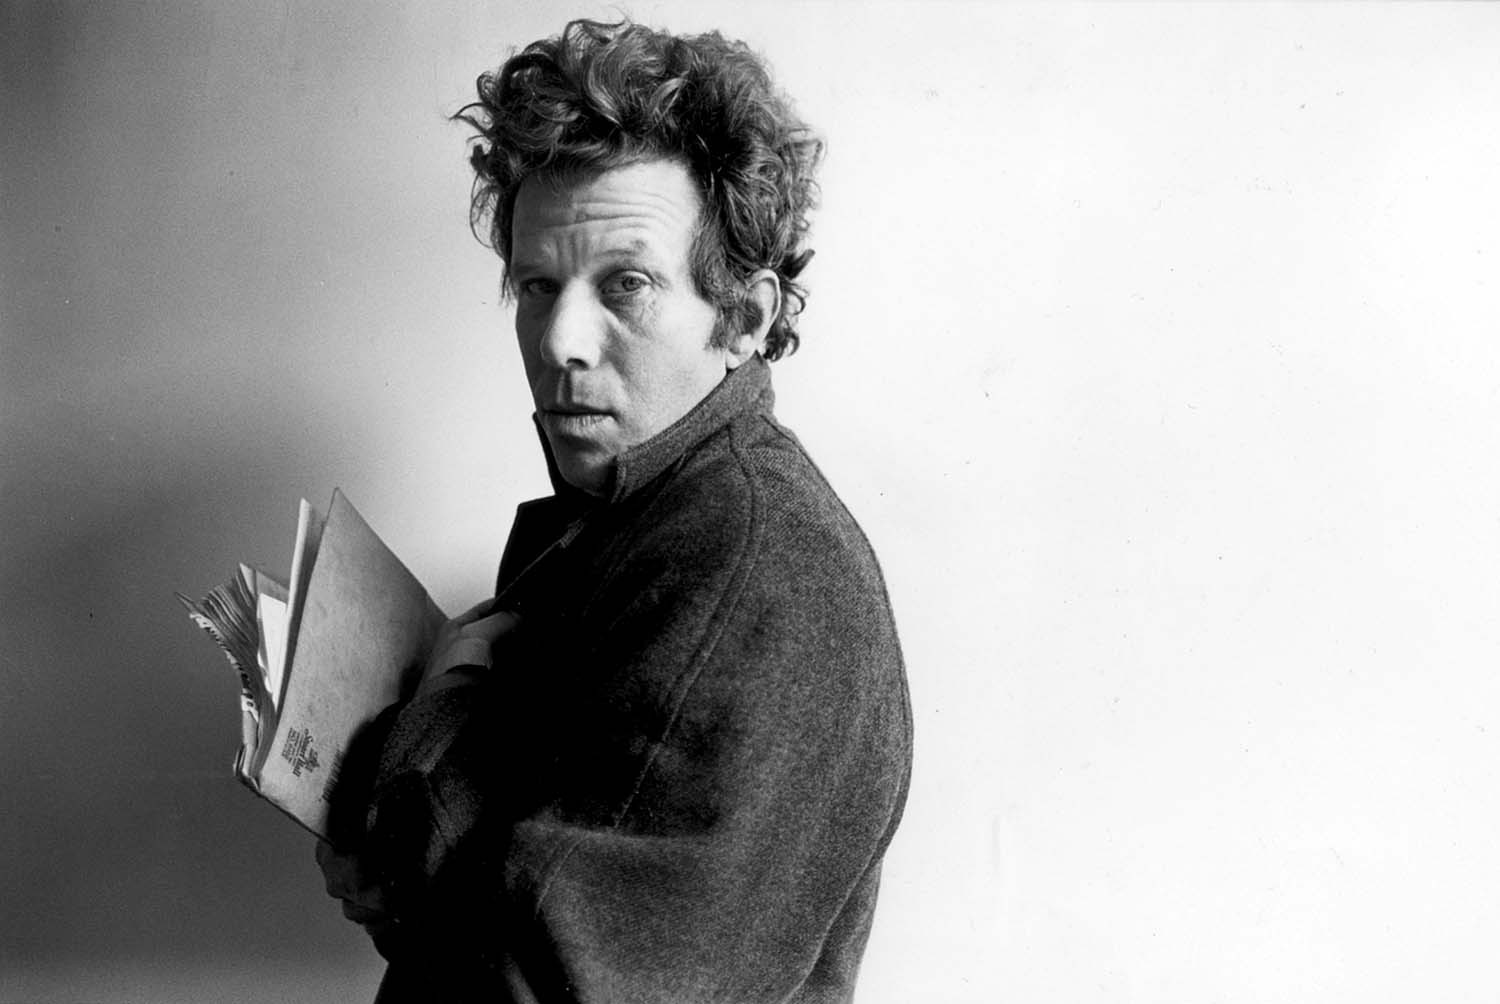 Tom Waits Songwriters Singer Musician Actor Monochrome 1500x1004